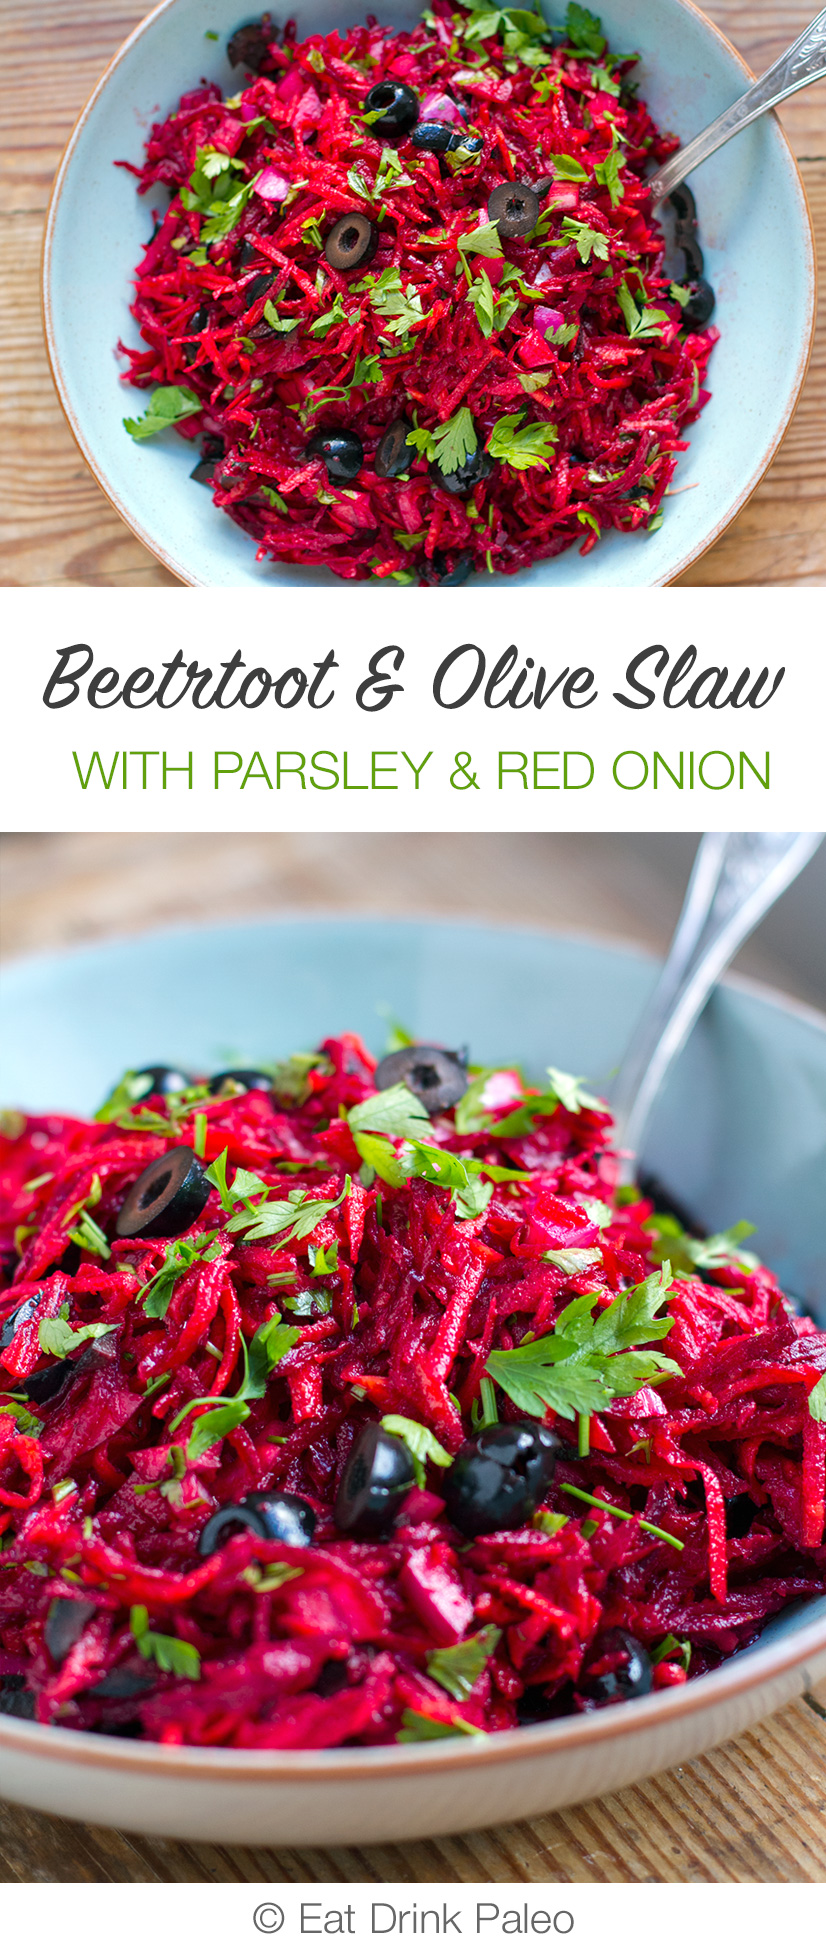 Beetroot & Olive Slaw With Parsley & Red Onions (Paleo, Whole30, Vegan)